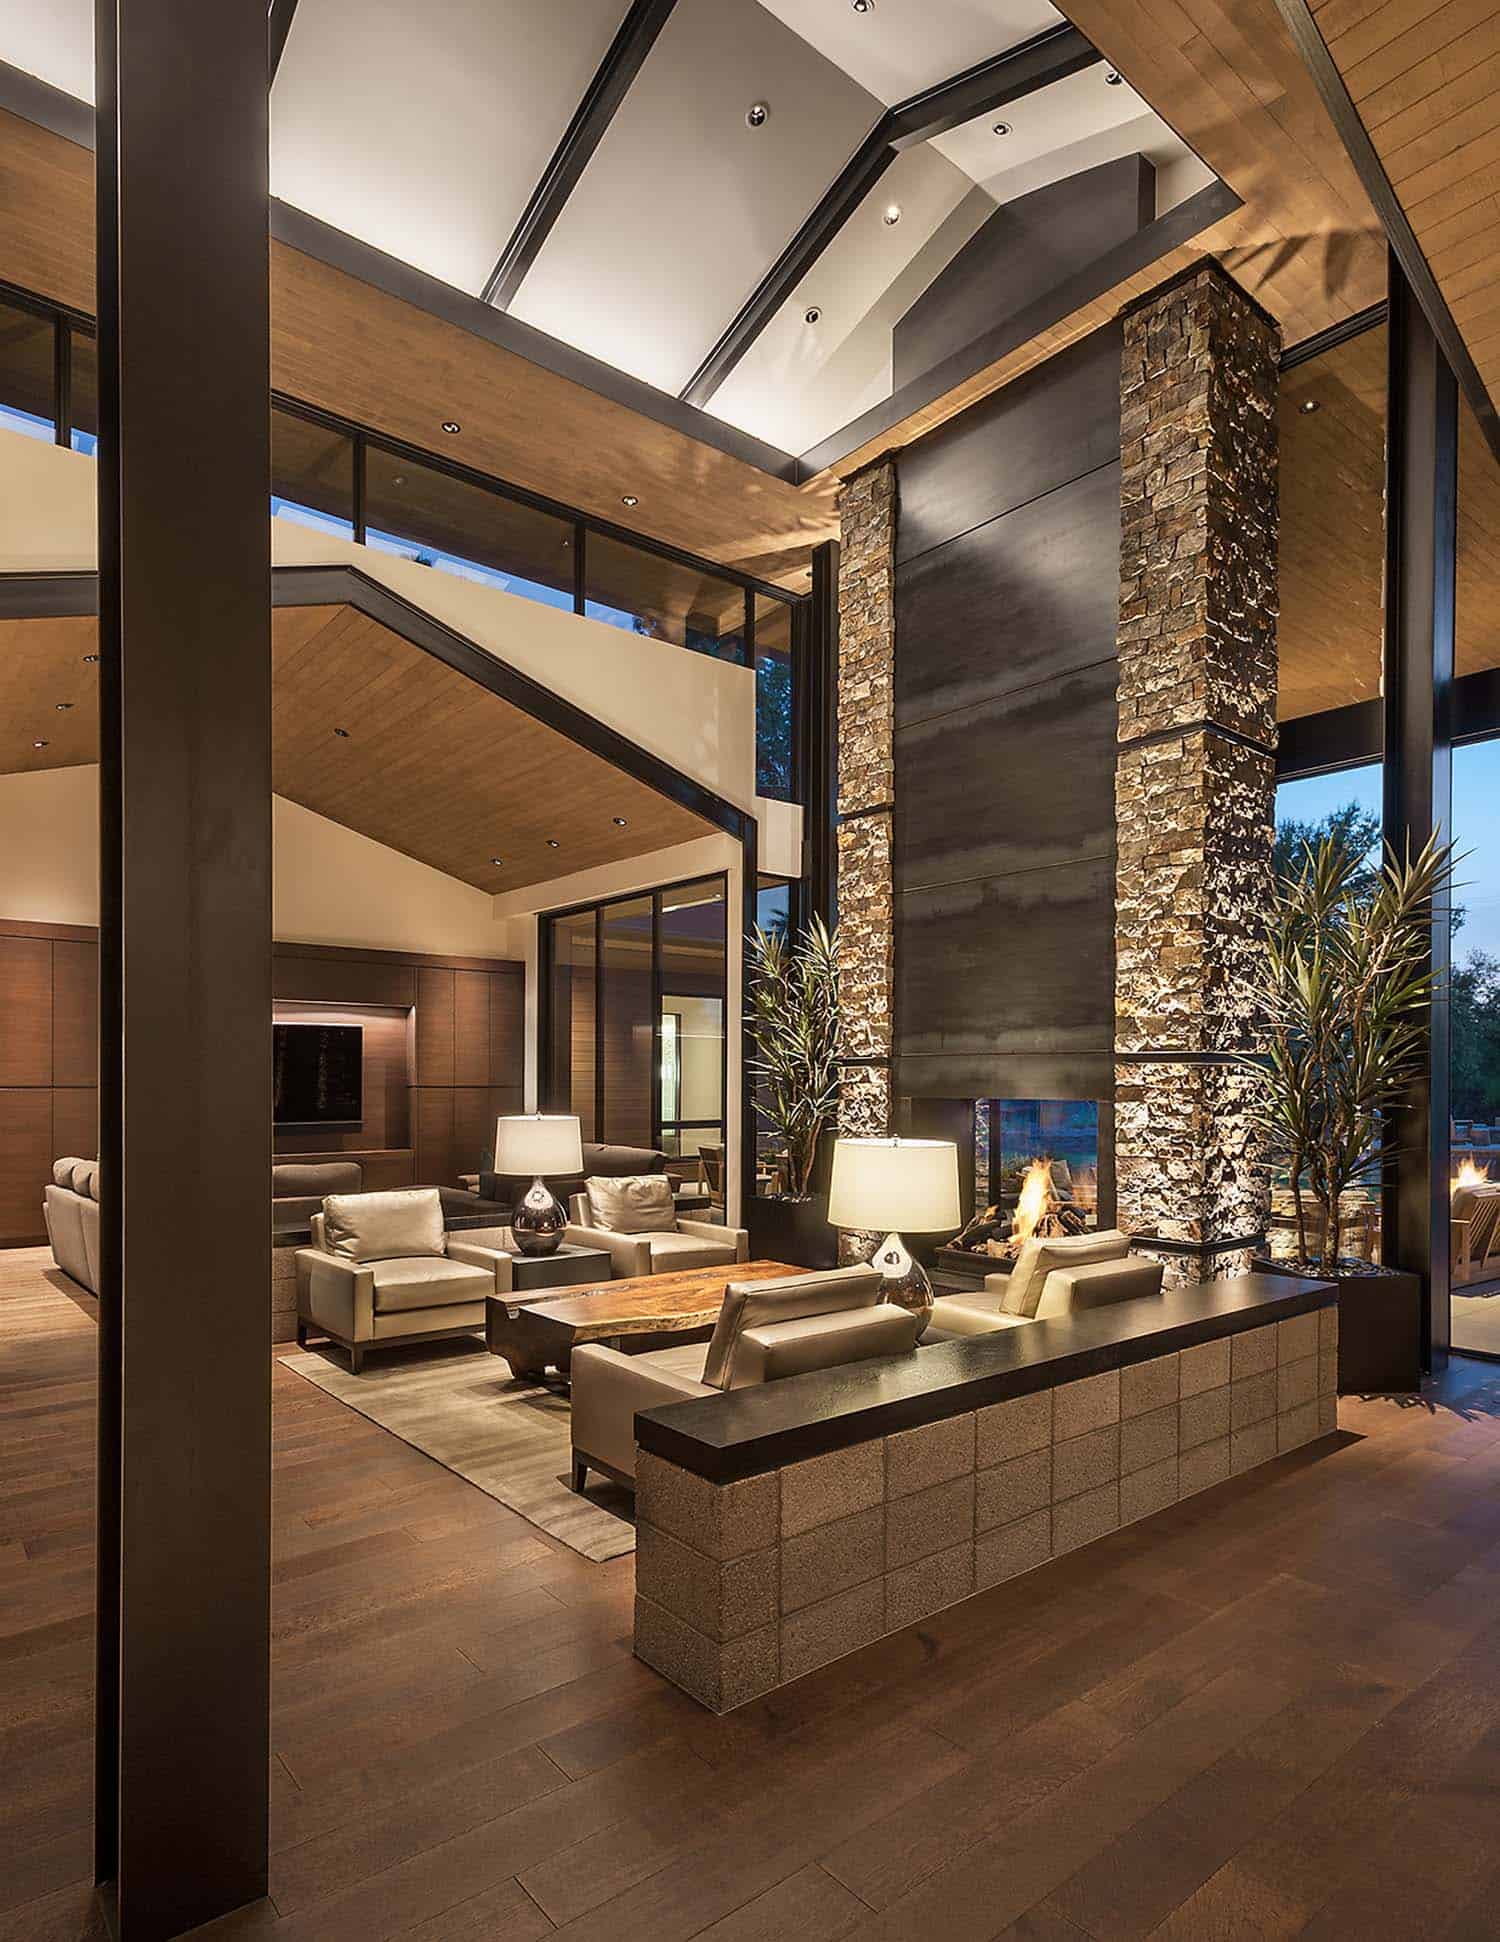 Walls of glass defines Arizona home re-imagined for a modern lifestyle